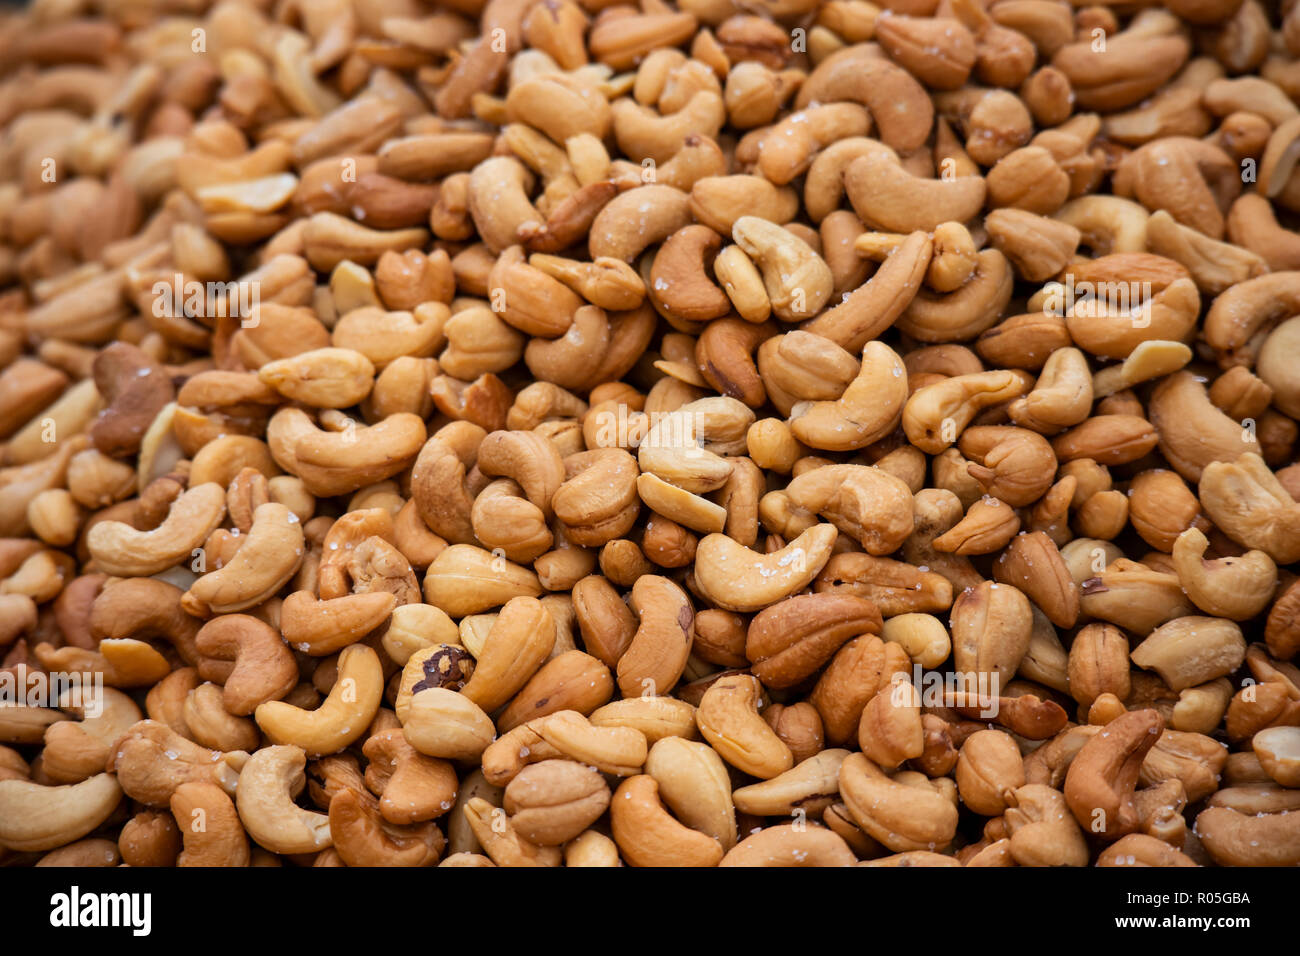 pile of cashew nuts Stock Photo